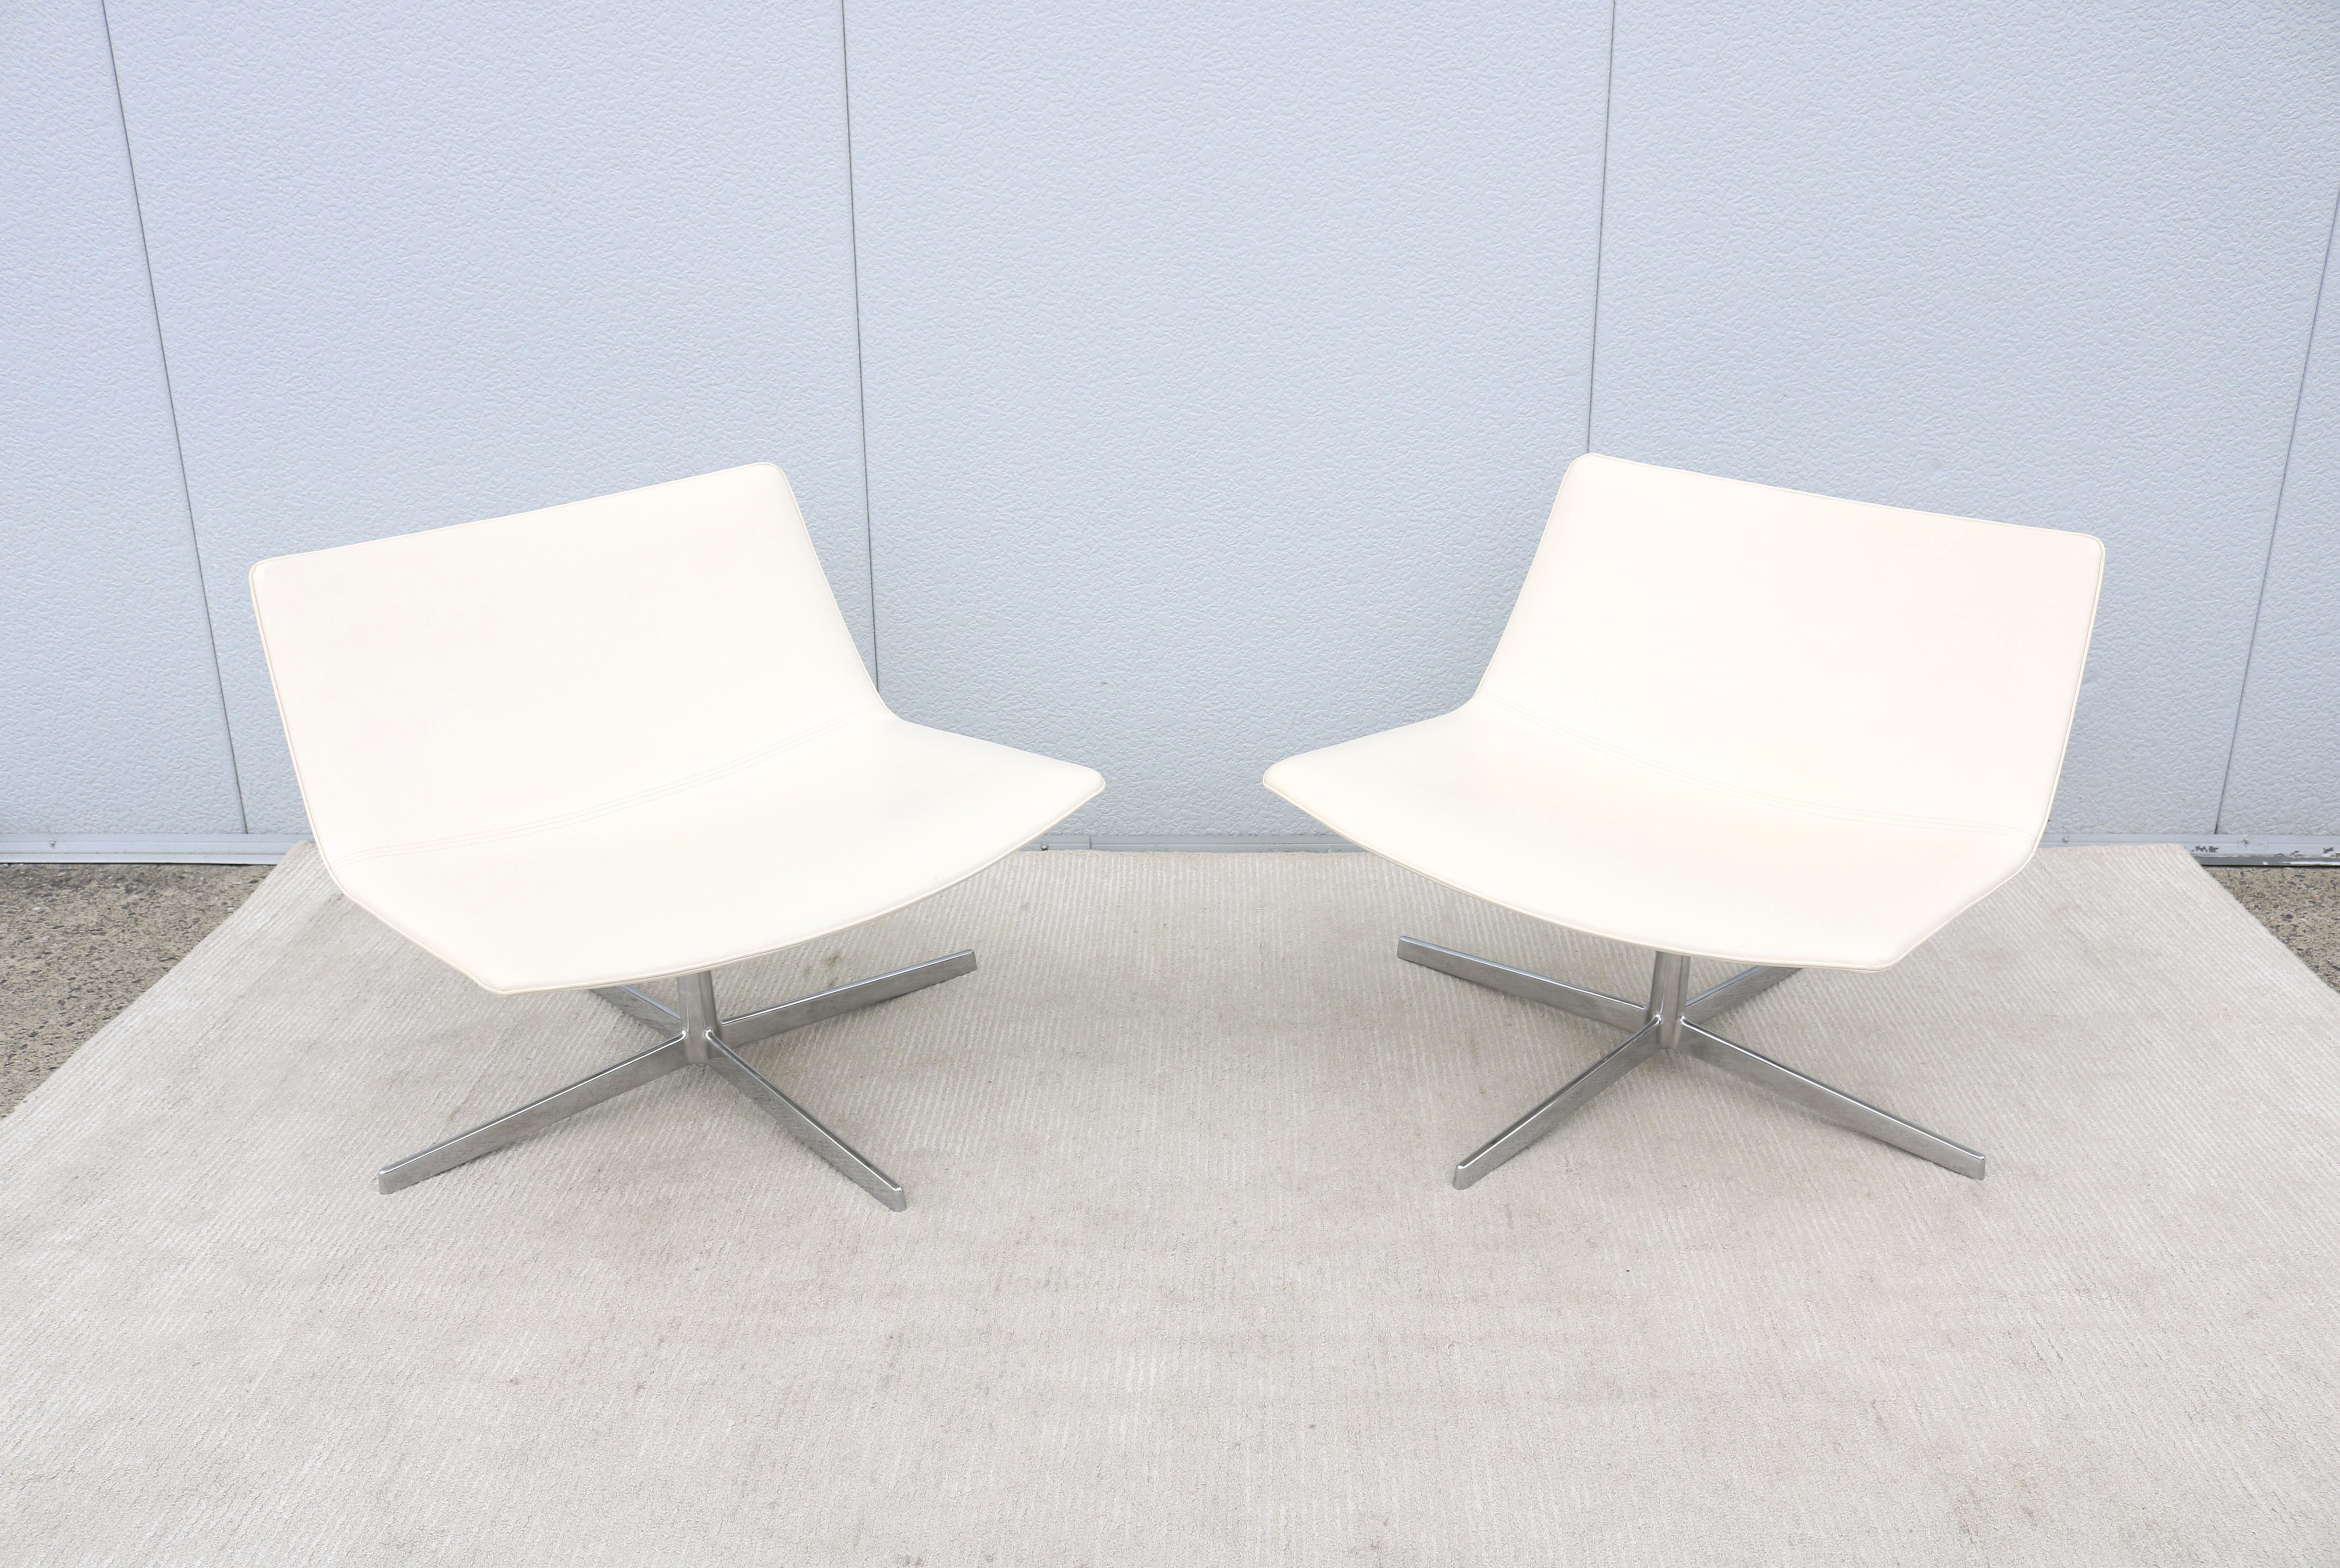 Fabulous pair of Catifa 80 swivel lounge chairs designed by Lievore Altherr Molina for the Italian manufacturer Arper.
The Catifa lounge chair can be both embracing and thin as a line. It is a synthesis of maximum generosity and minimum gesture. It